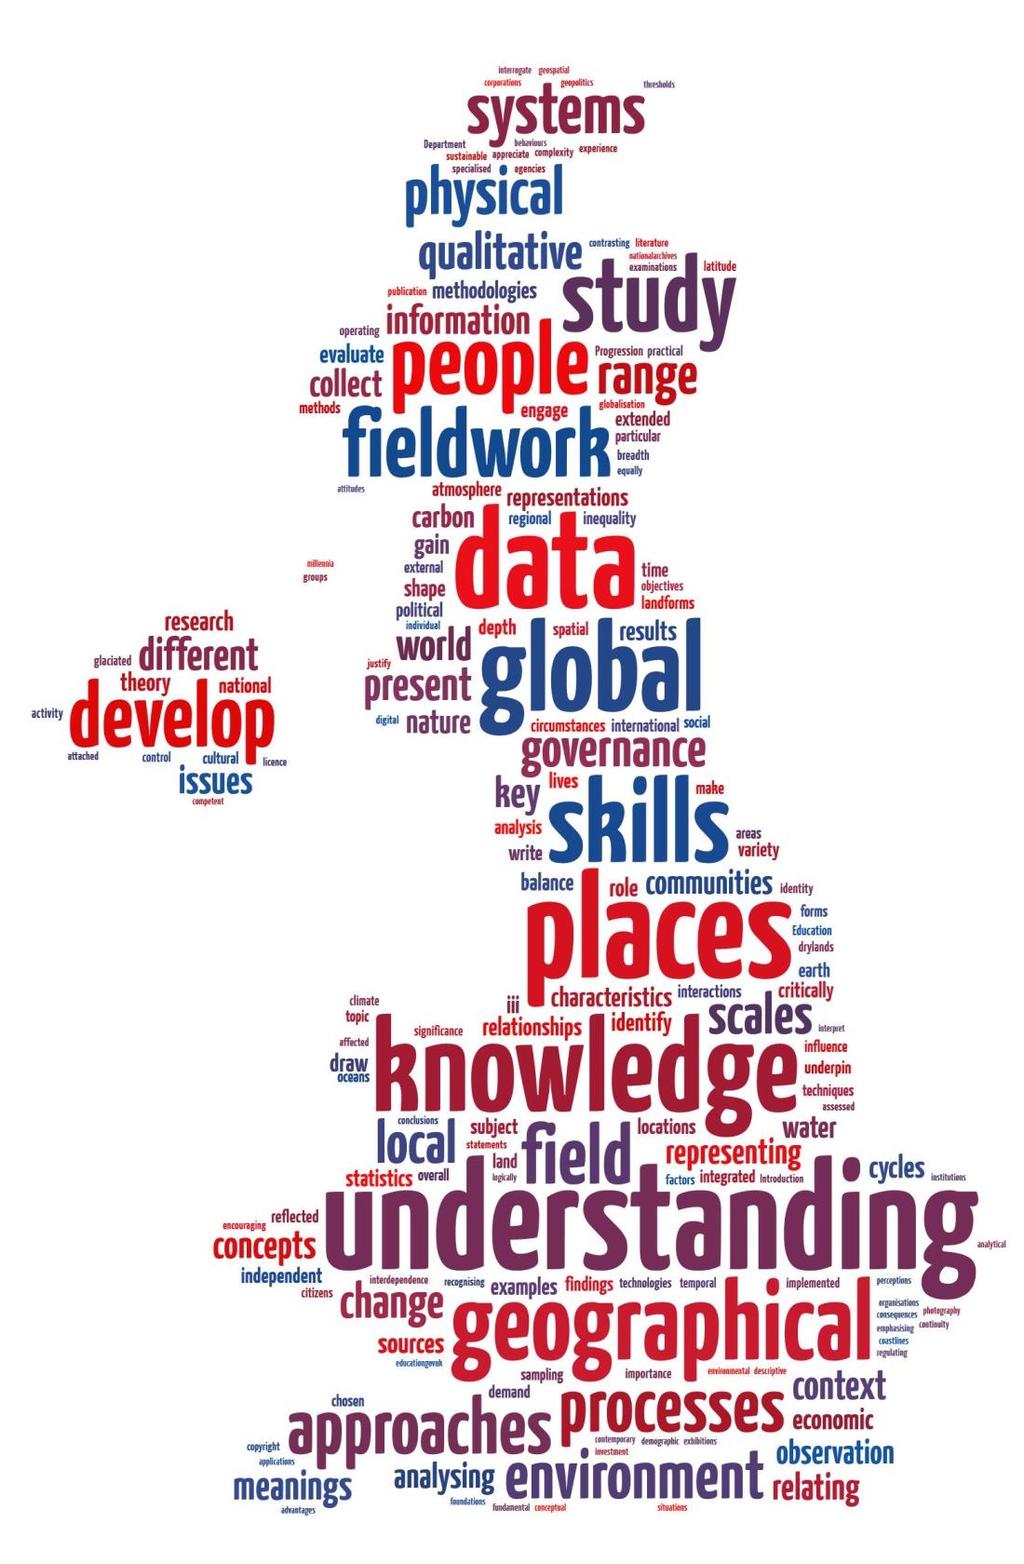 DFE content criteria Core (60%) Four topics plus skills and (compulsory) fieldwork Independent Study 40% Awarding Body selected material Balanced Human/Physical Embedded skills